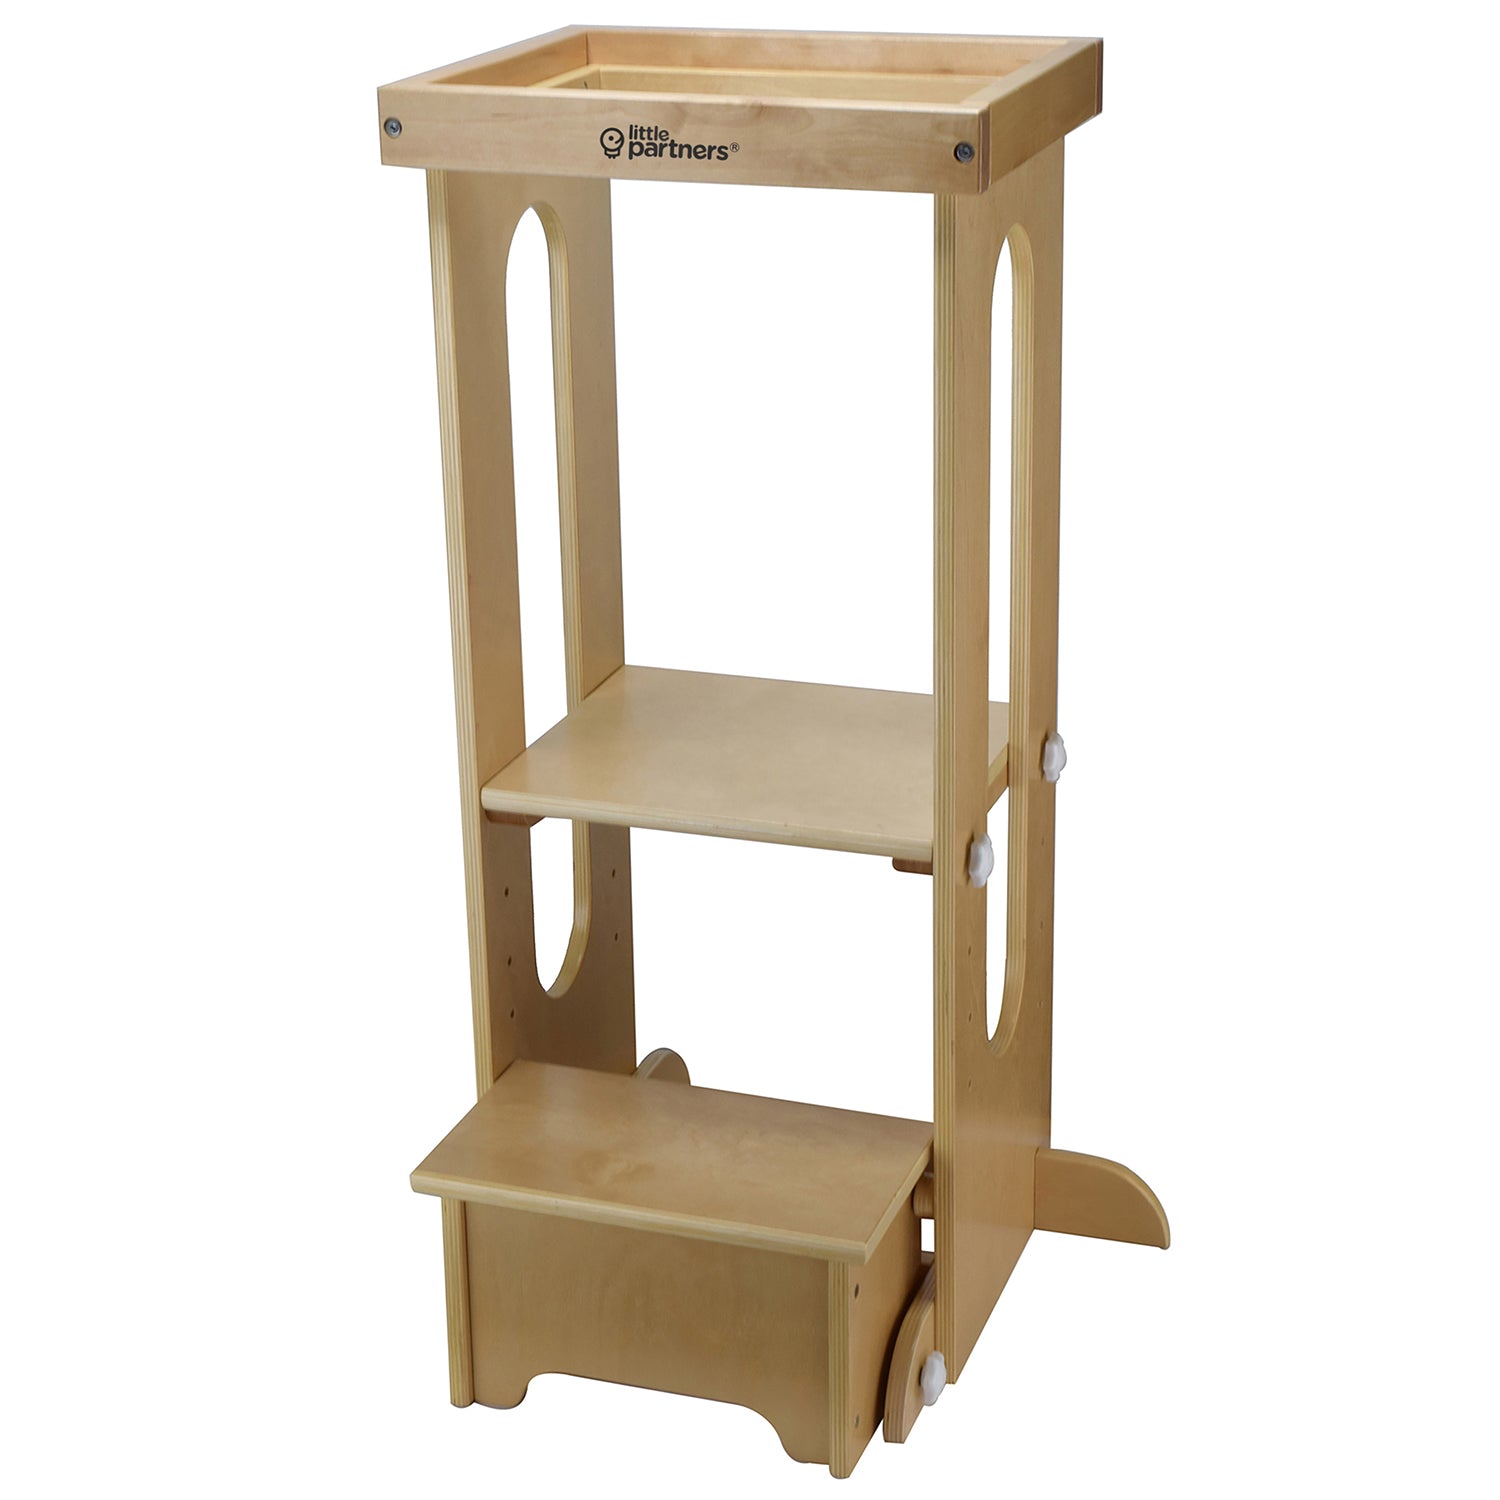 Explore 'N Store™ Learning Tower® by Little Partners®